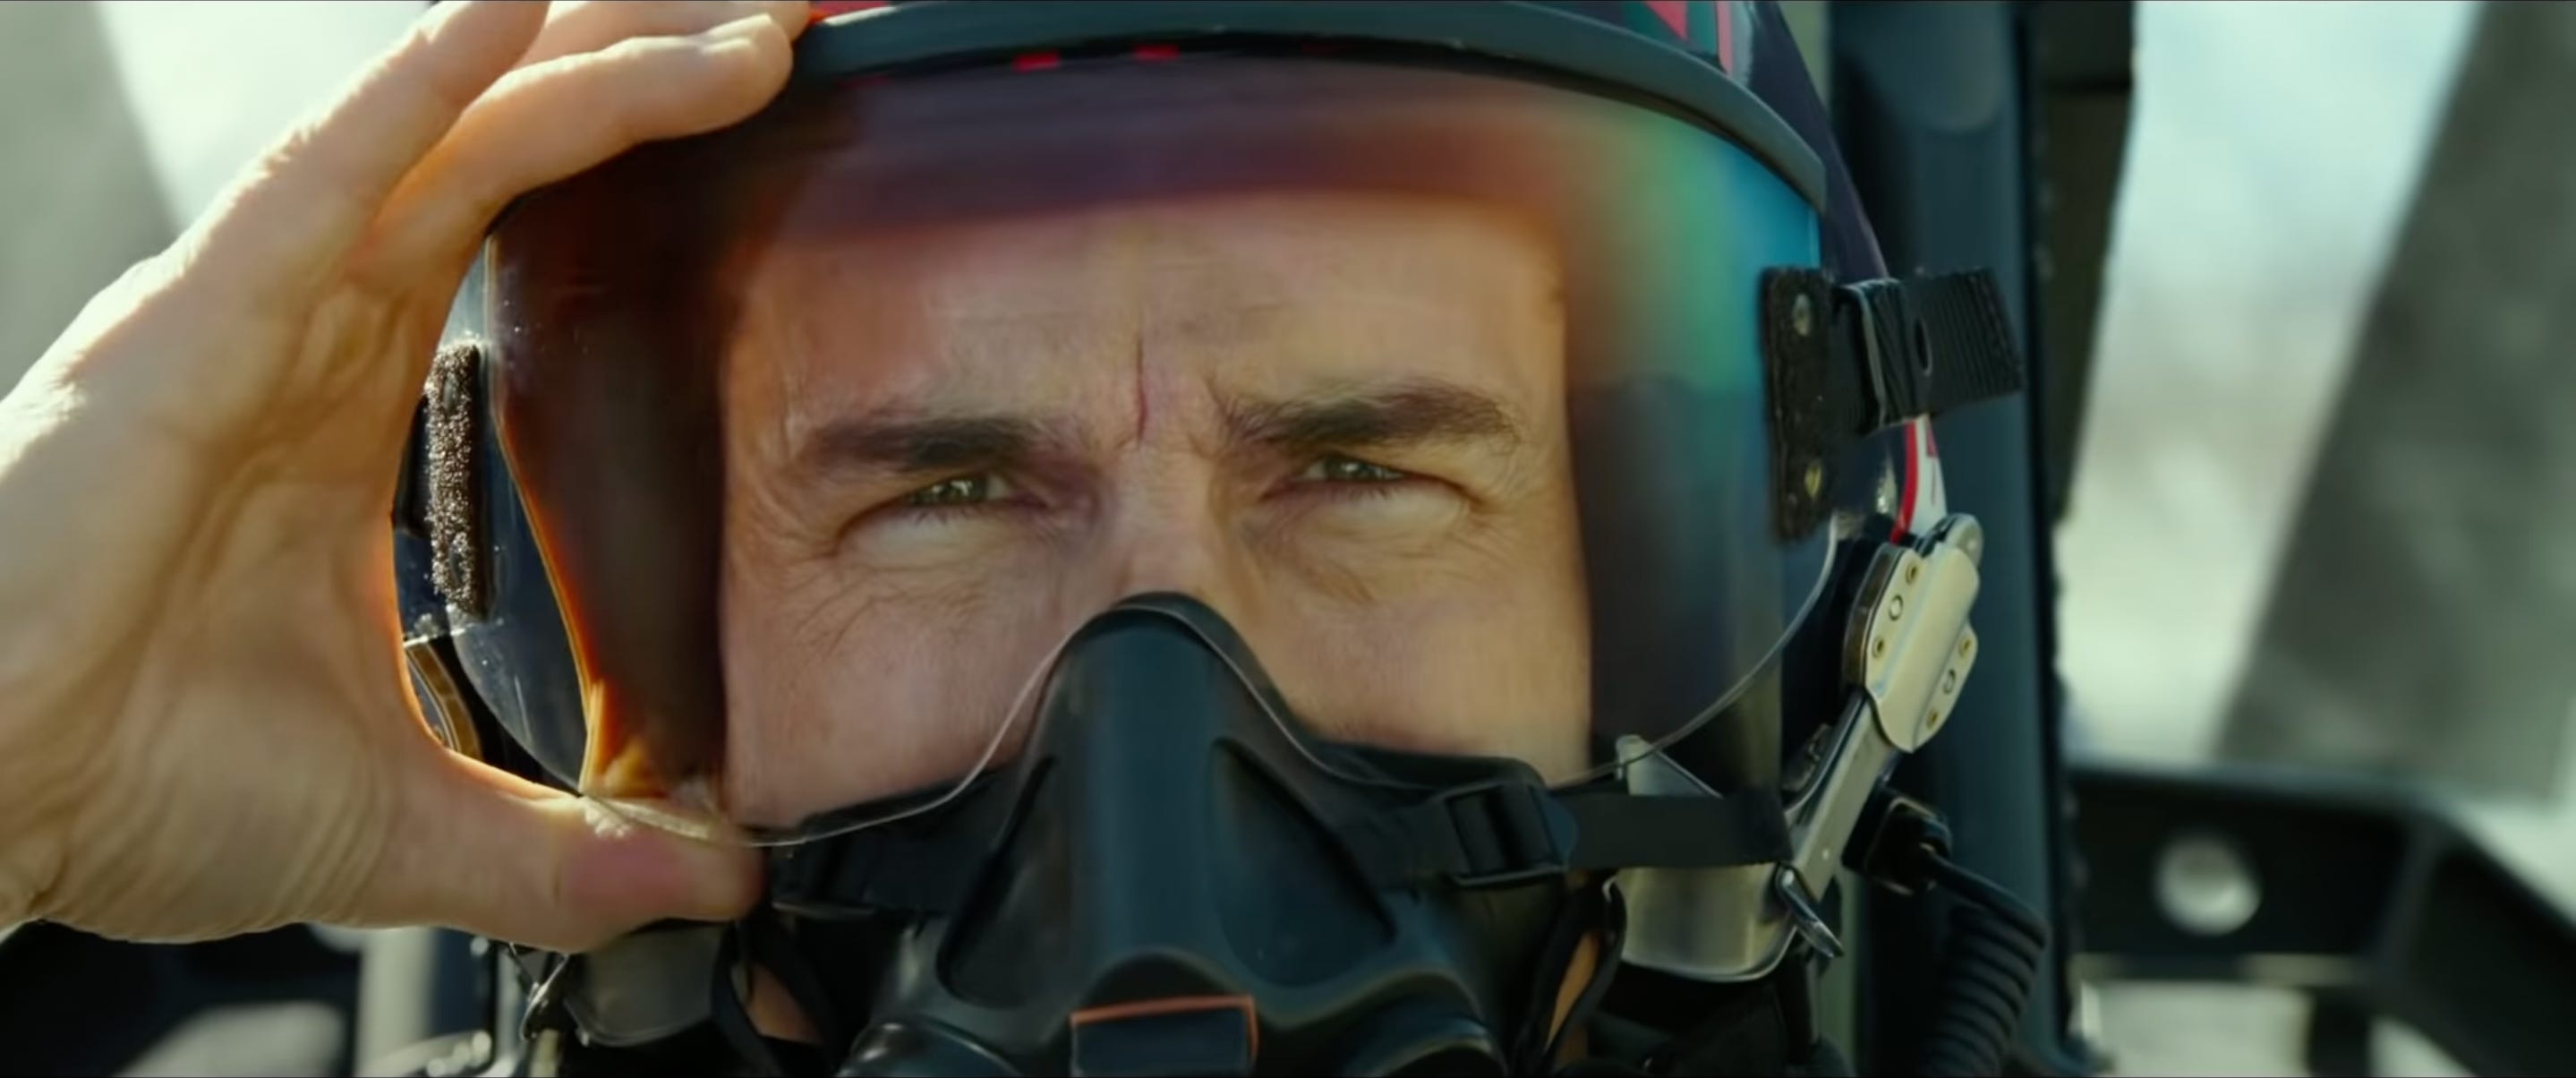 Jennifer Connelly's Top Gun: Maverick Character Isn't New To The Franchise